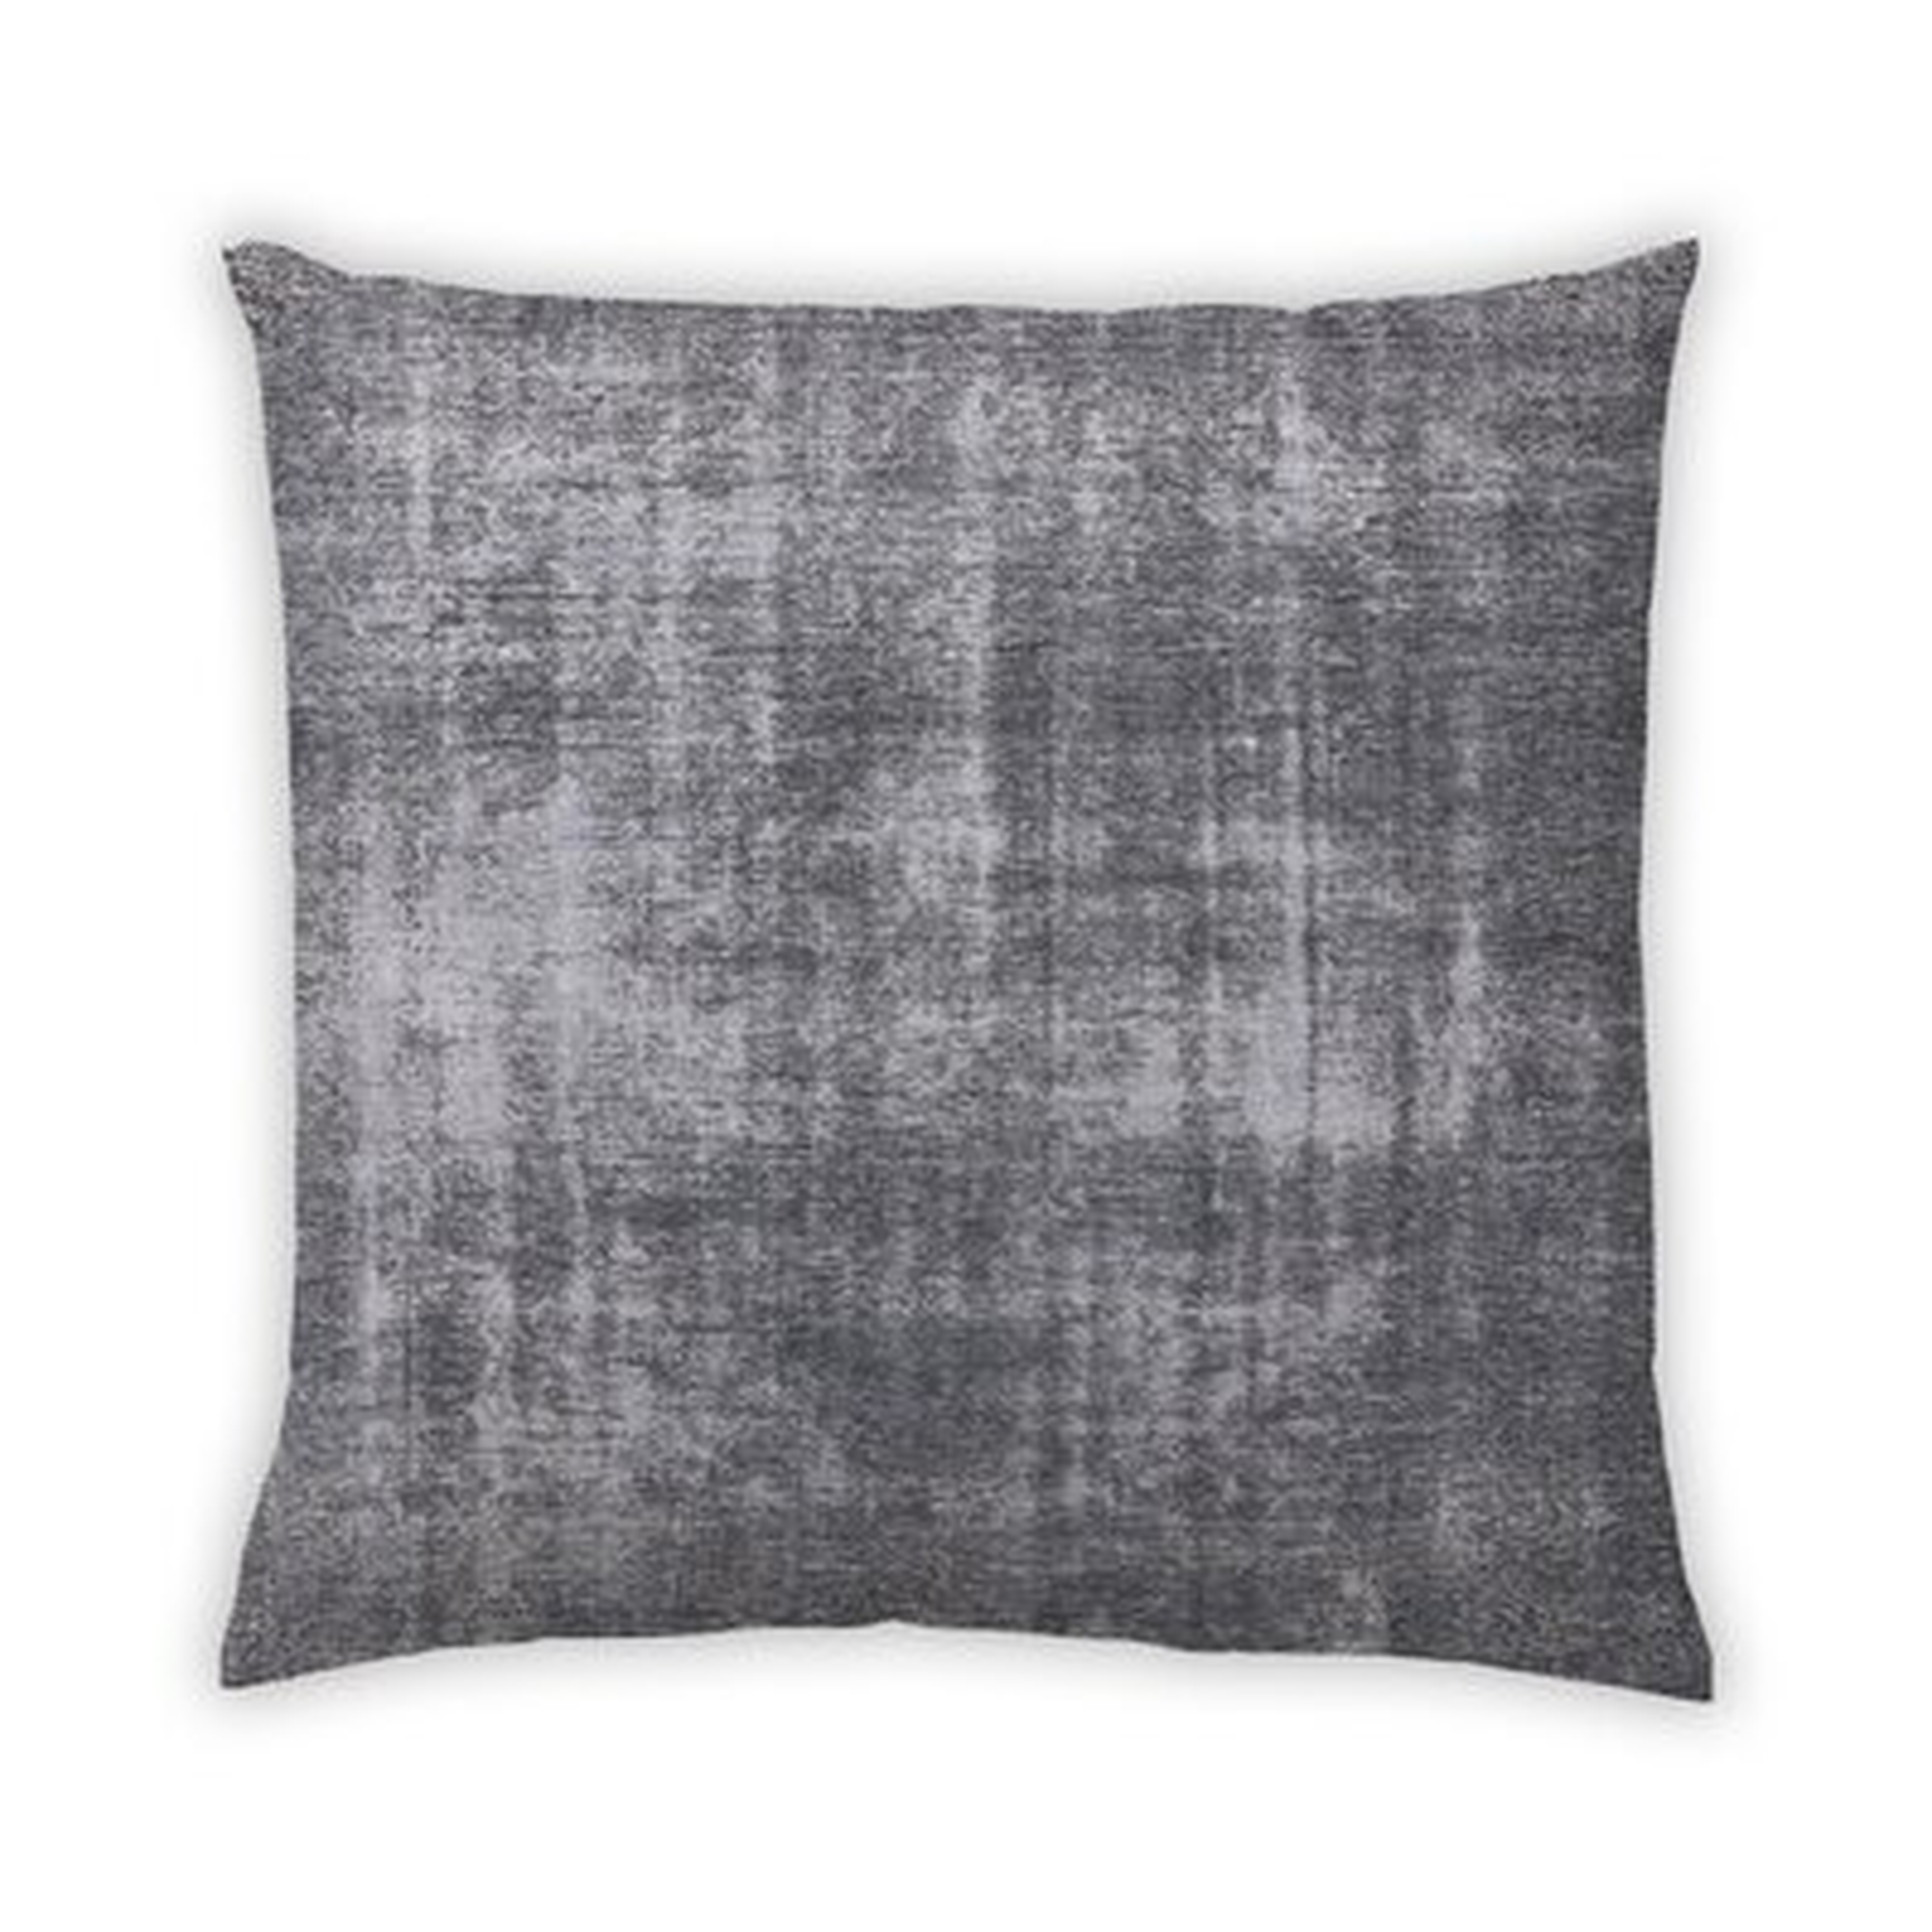 Oley Mid-Century Urban Outdoor Square Pillow Cover & Insert - Wayfair